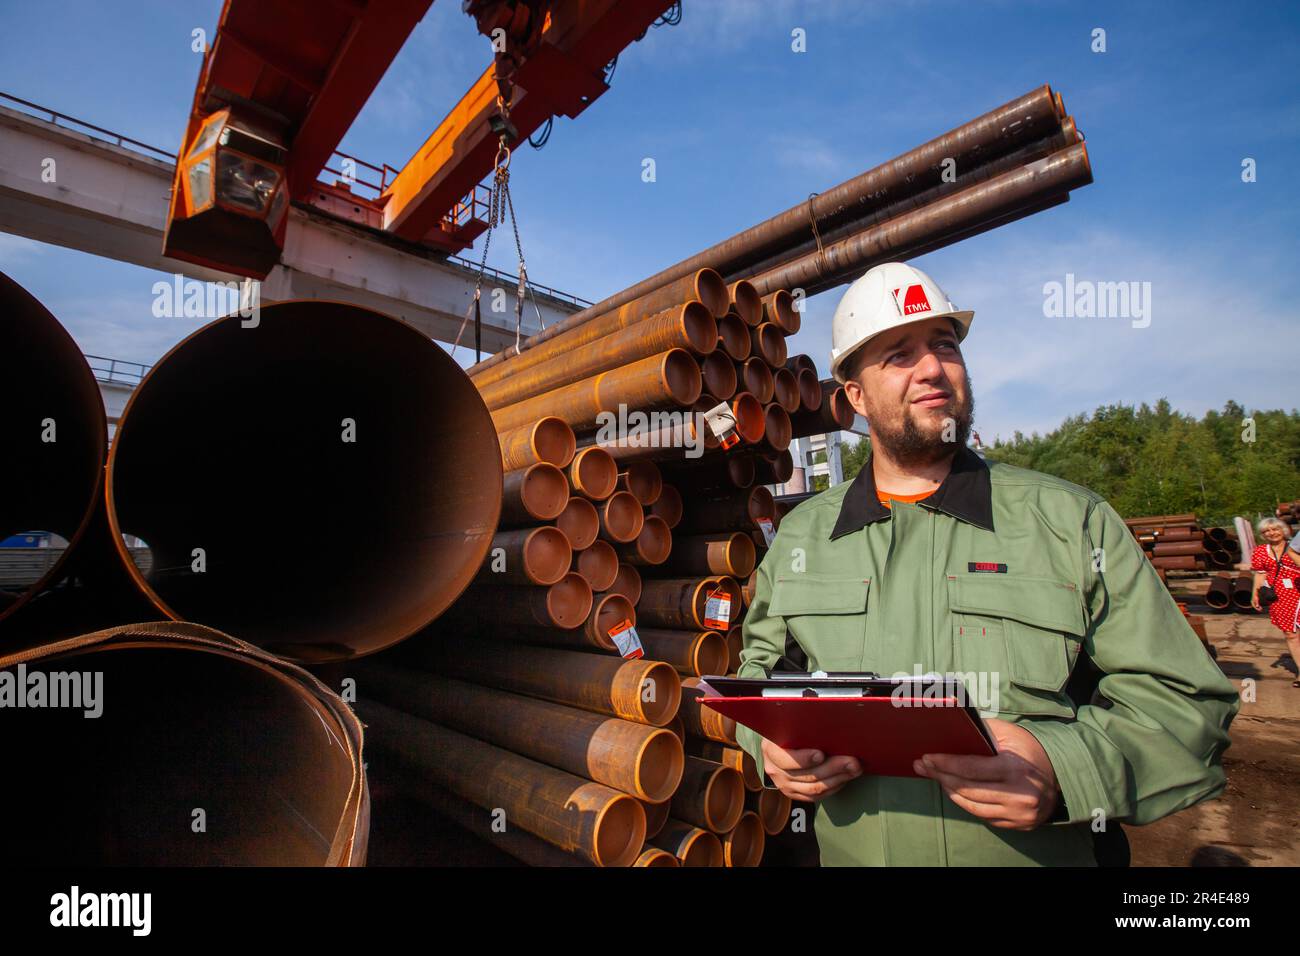 Podolsk, Moscow province - August 02, 2021: Engineer portrait on tubes and  overhead crane background. Pipes warehouse. Stock Photo